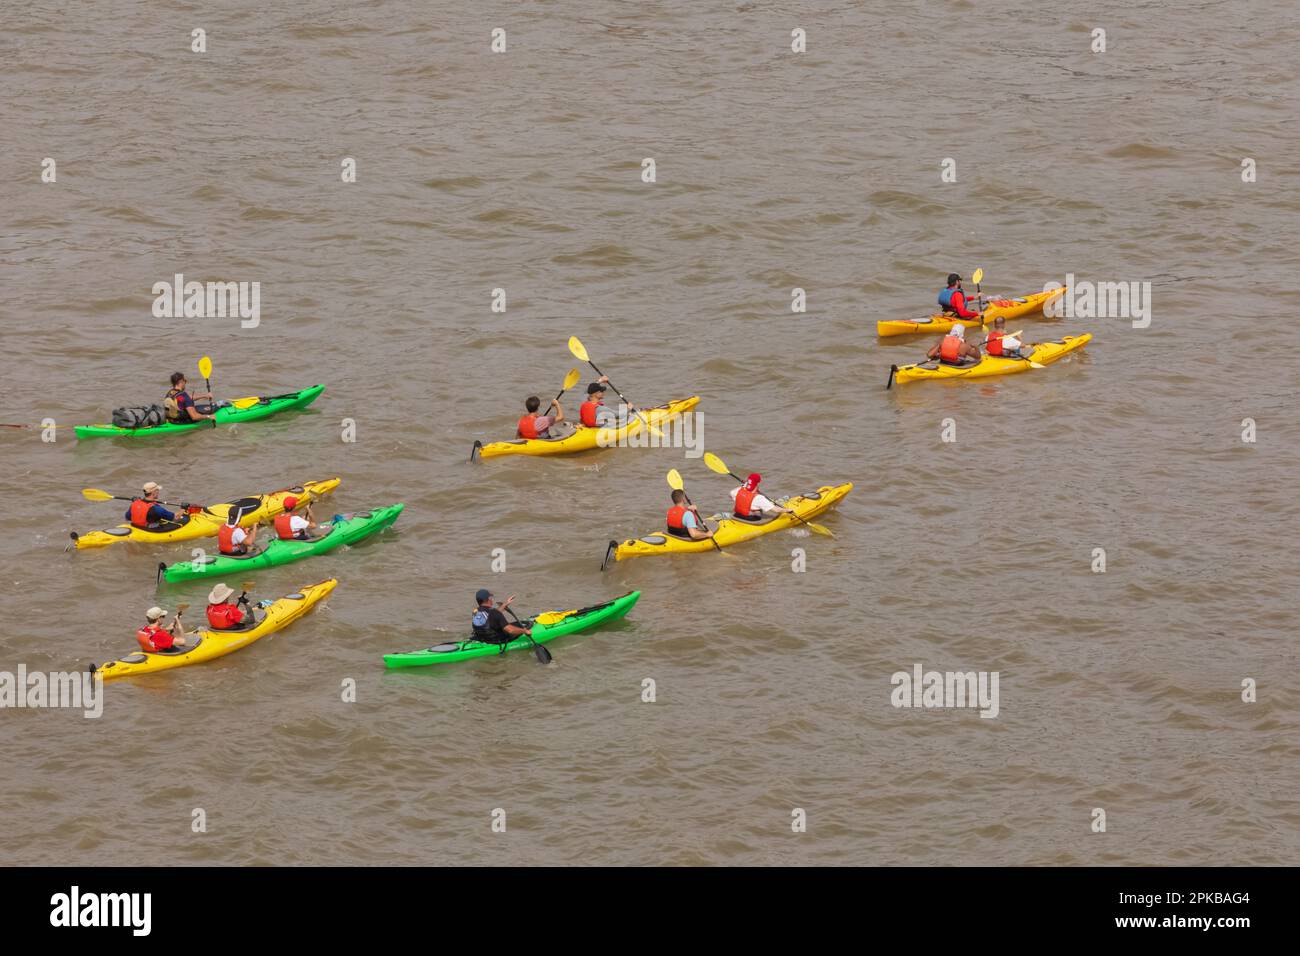 England, London, Colourful Group of Kayakers on River Thames Stock Photo